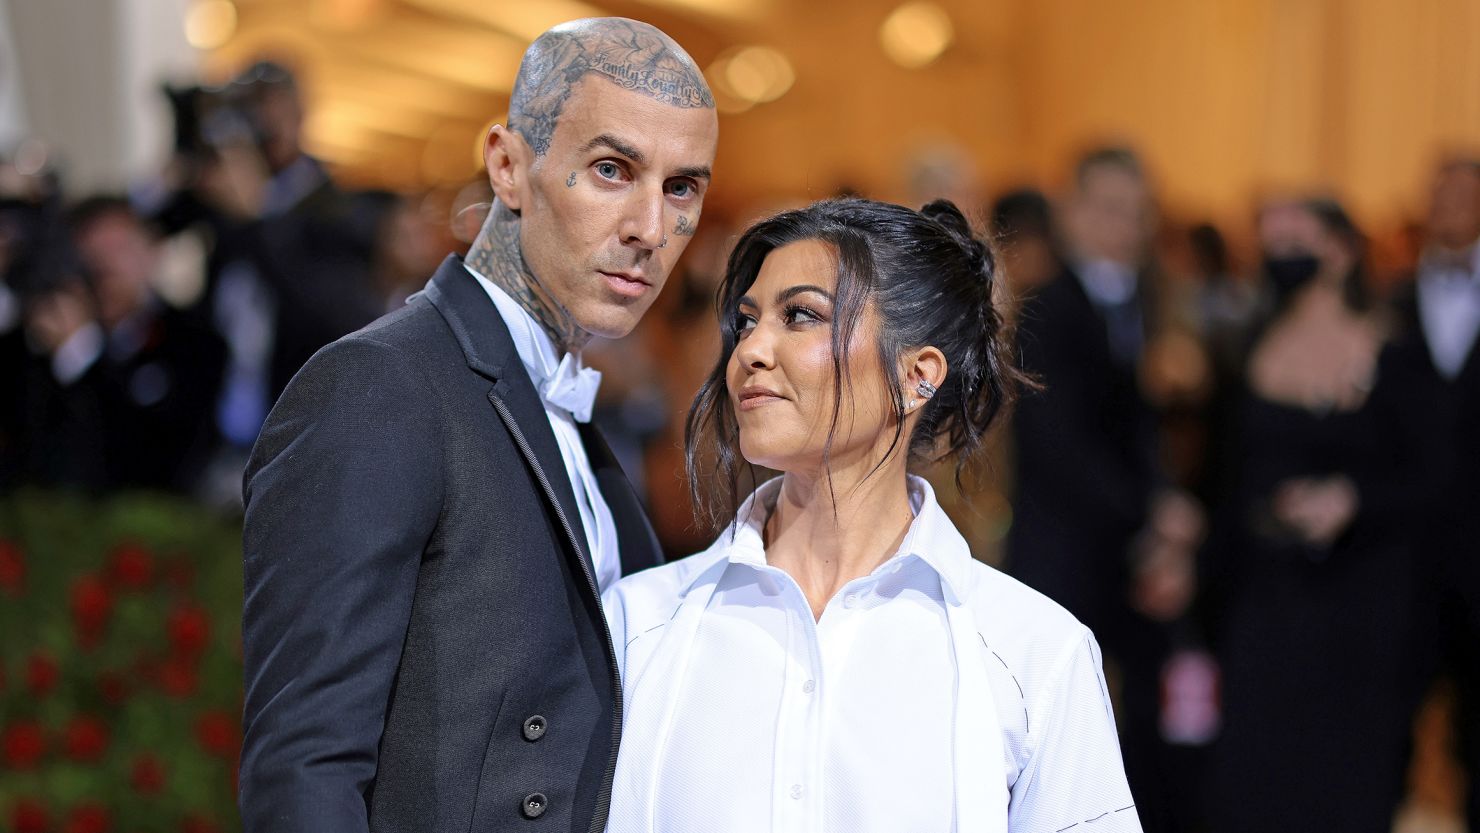 Travis Barker and Kourtney Kardashian, seen here attending The 2022 Met Gala at The Metropolitan Museum of Art on May 02, 2022 in New York City, have announced they are married. 